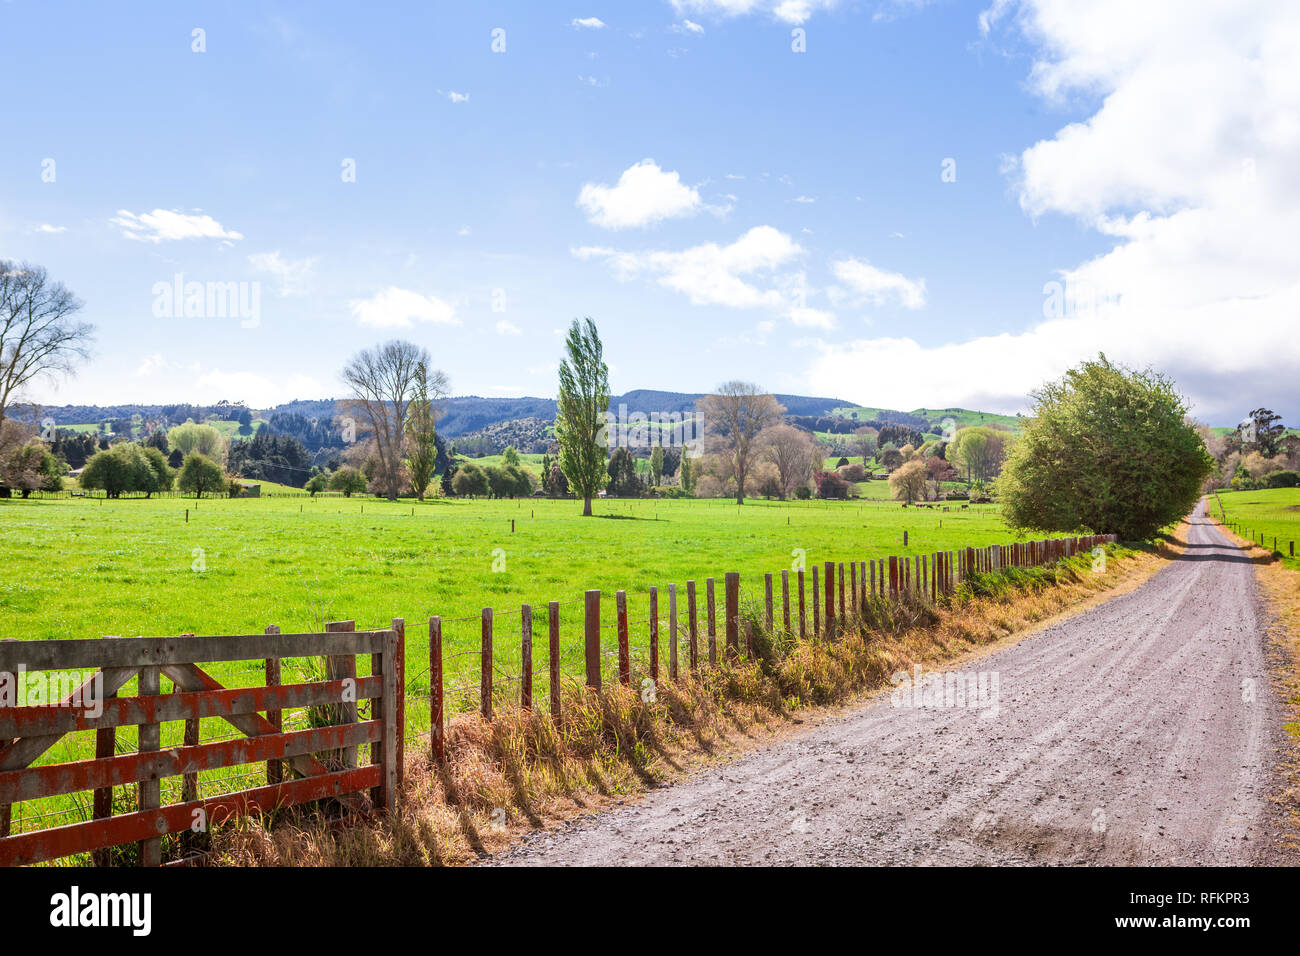 An unsealed road runs along past the fence and gate of a lush green farm property. Stock Photo